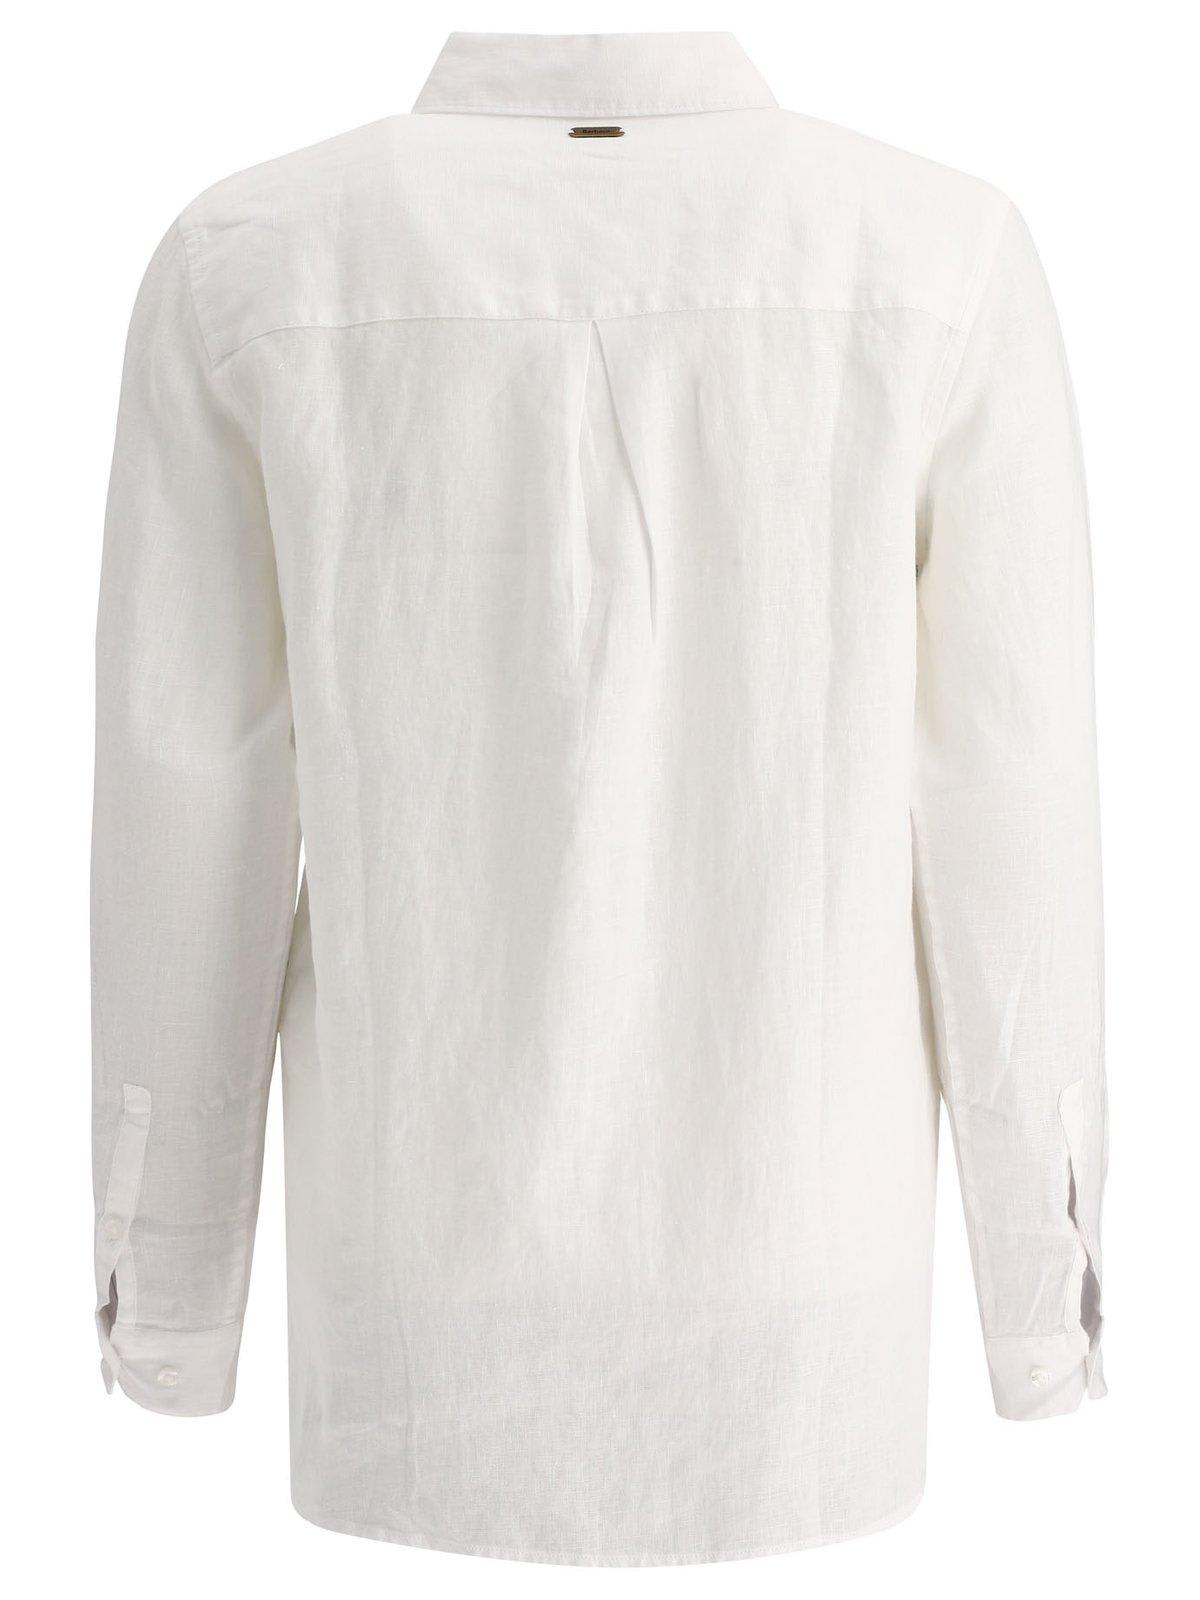 Shop Barbour Marine Buttoned Long Sleeved Shirt In White